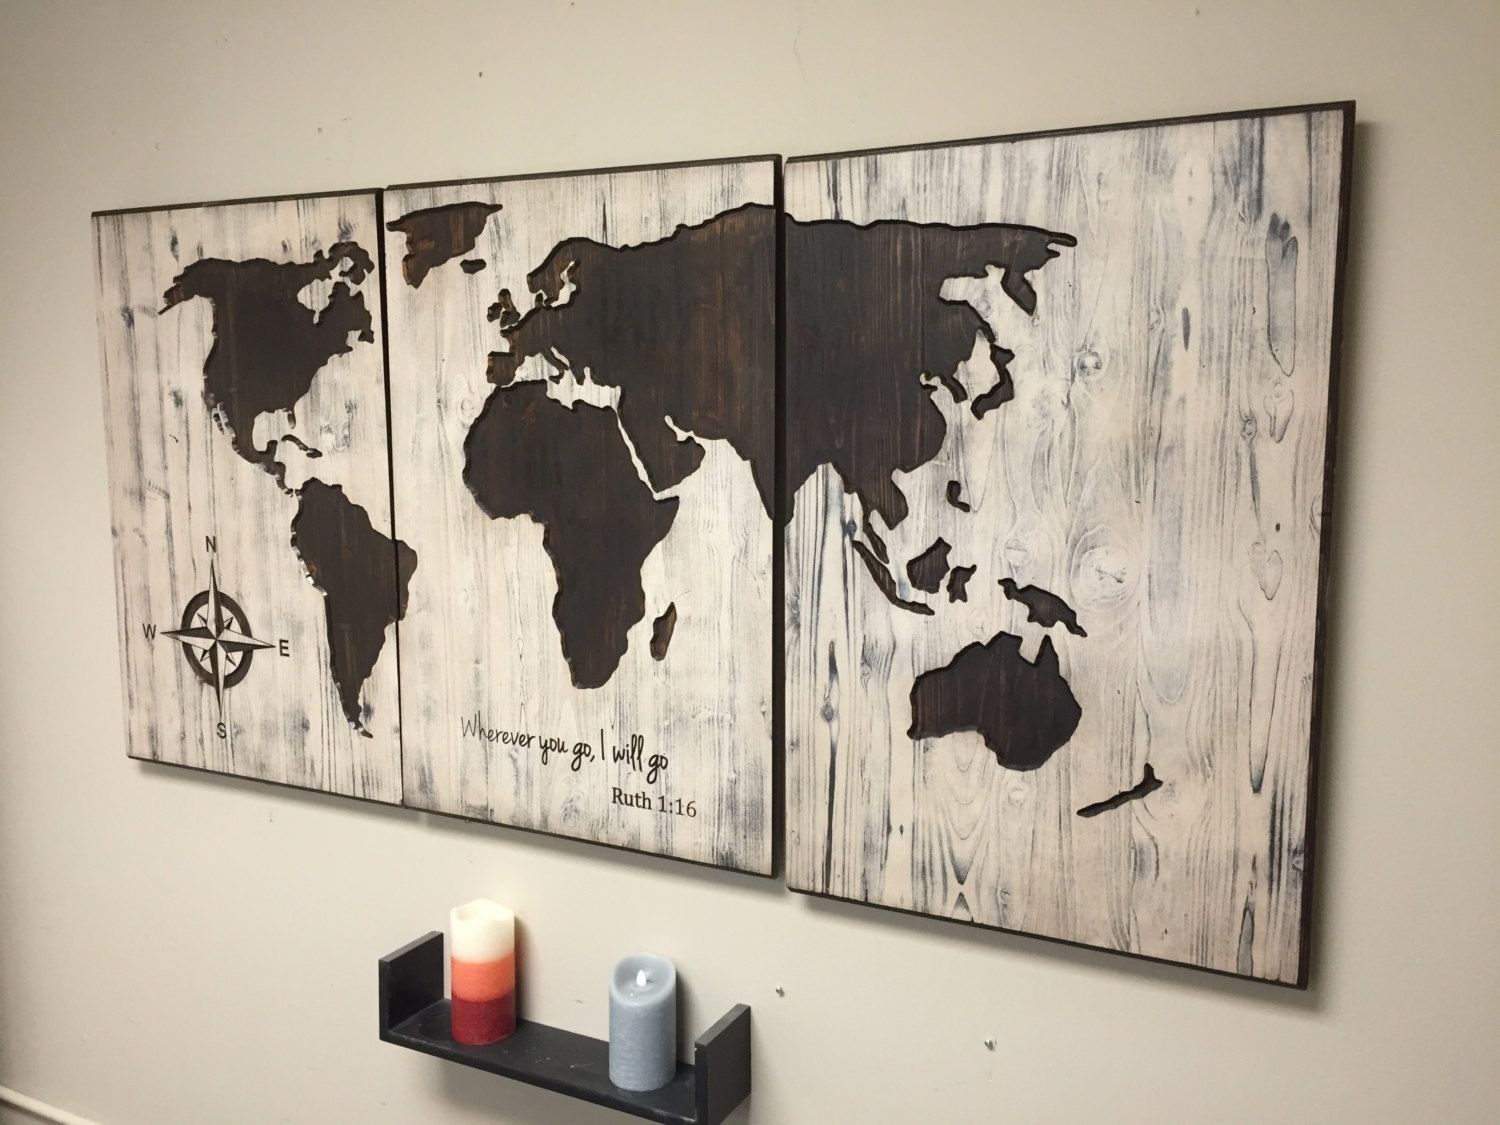 Rustic World Map Wall Art Carved Home Decor 3 Panel Map, Wooden Inside World Map Wood Wall Art (View 6 of 20)